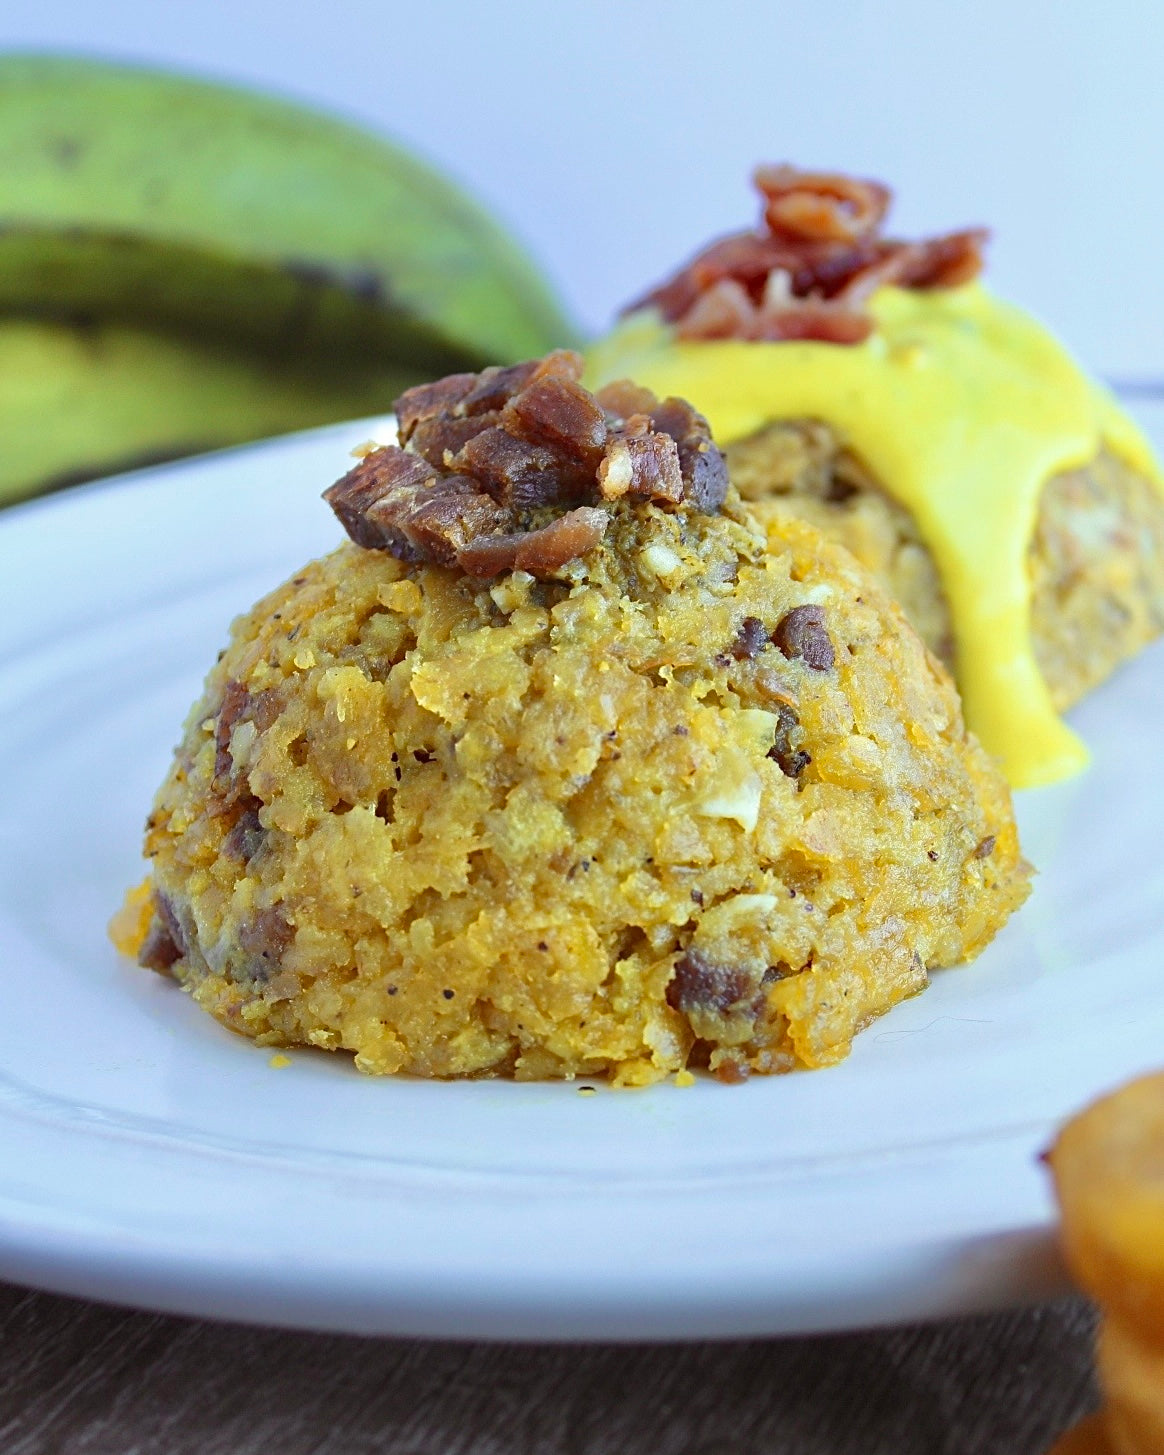 Two different types of mofongo on plate